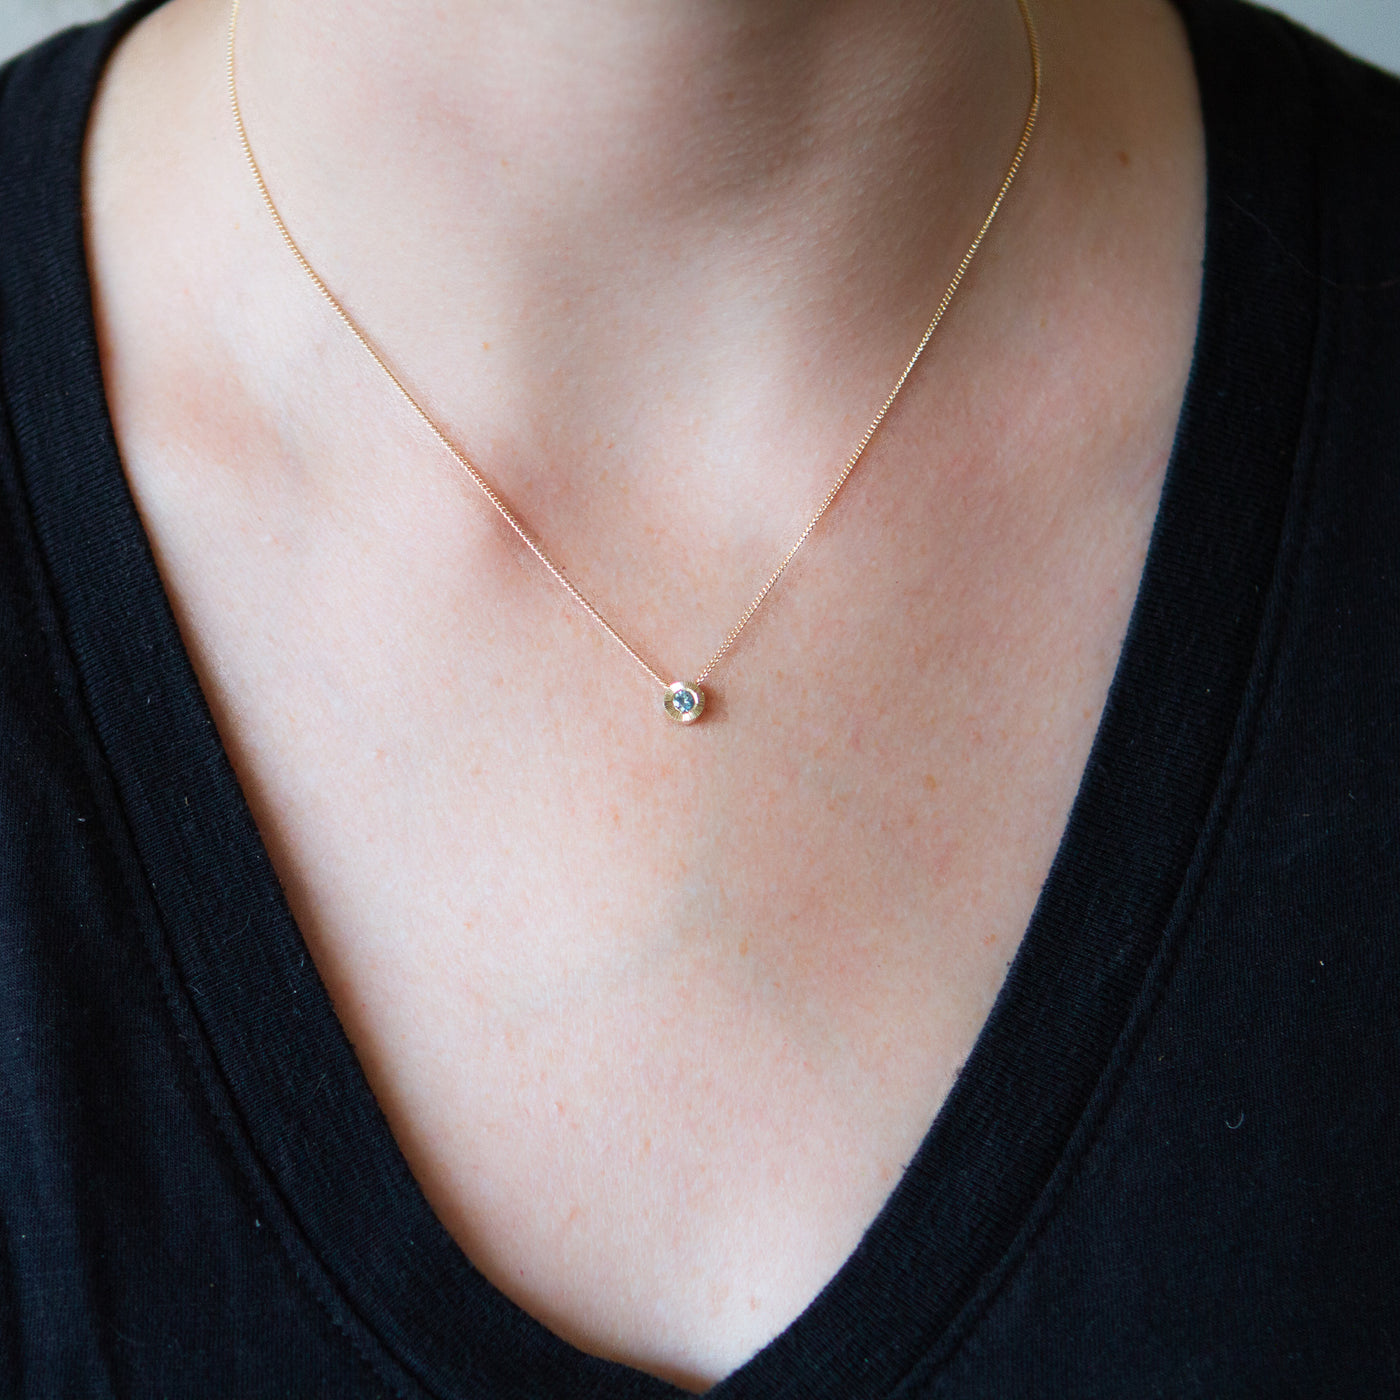 14k yellow gold small aurora necklace with a teal Montana sapphire center around a neck